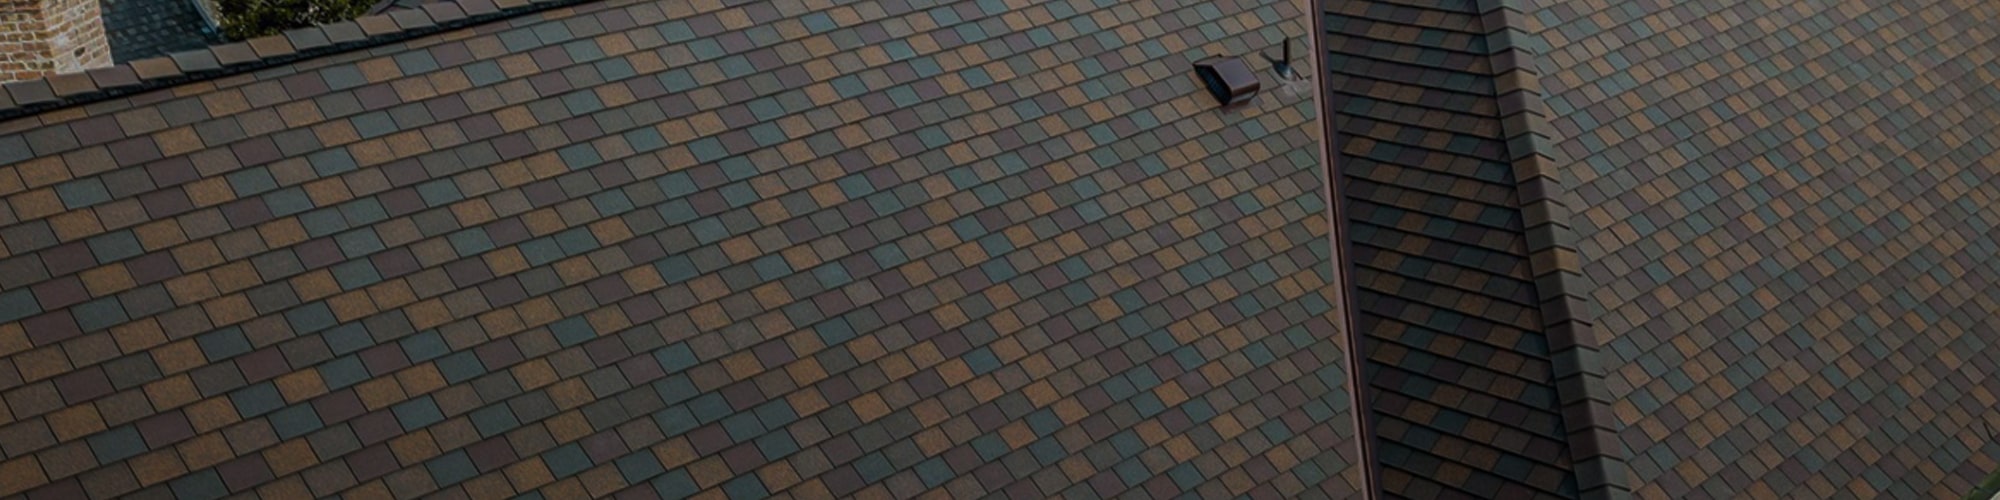 Synthetic Roofing Installations in West Michigan